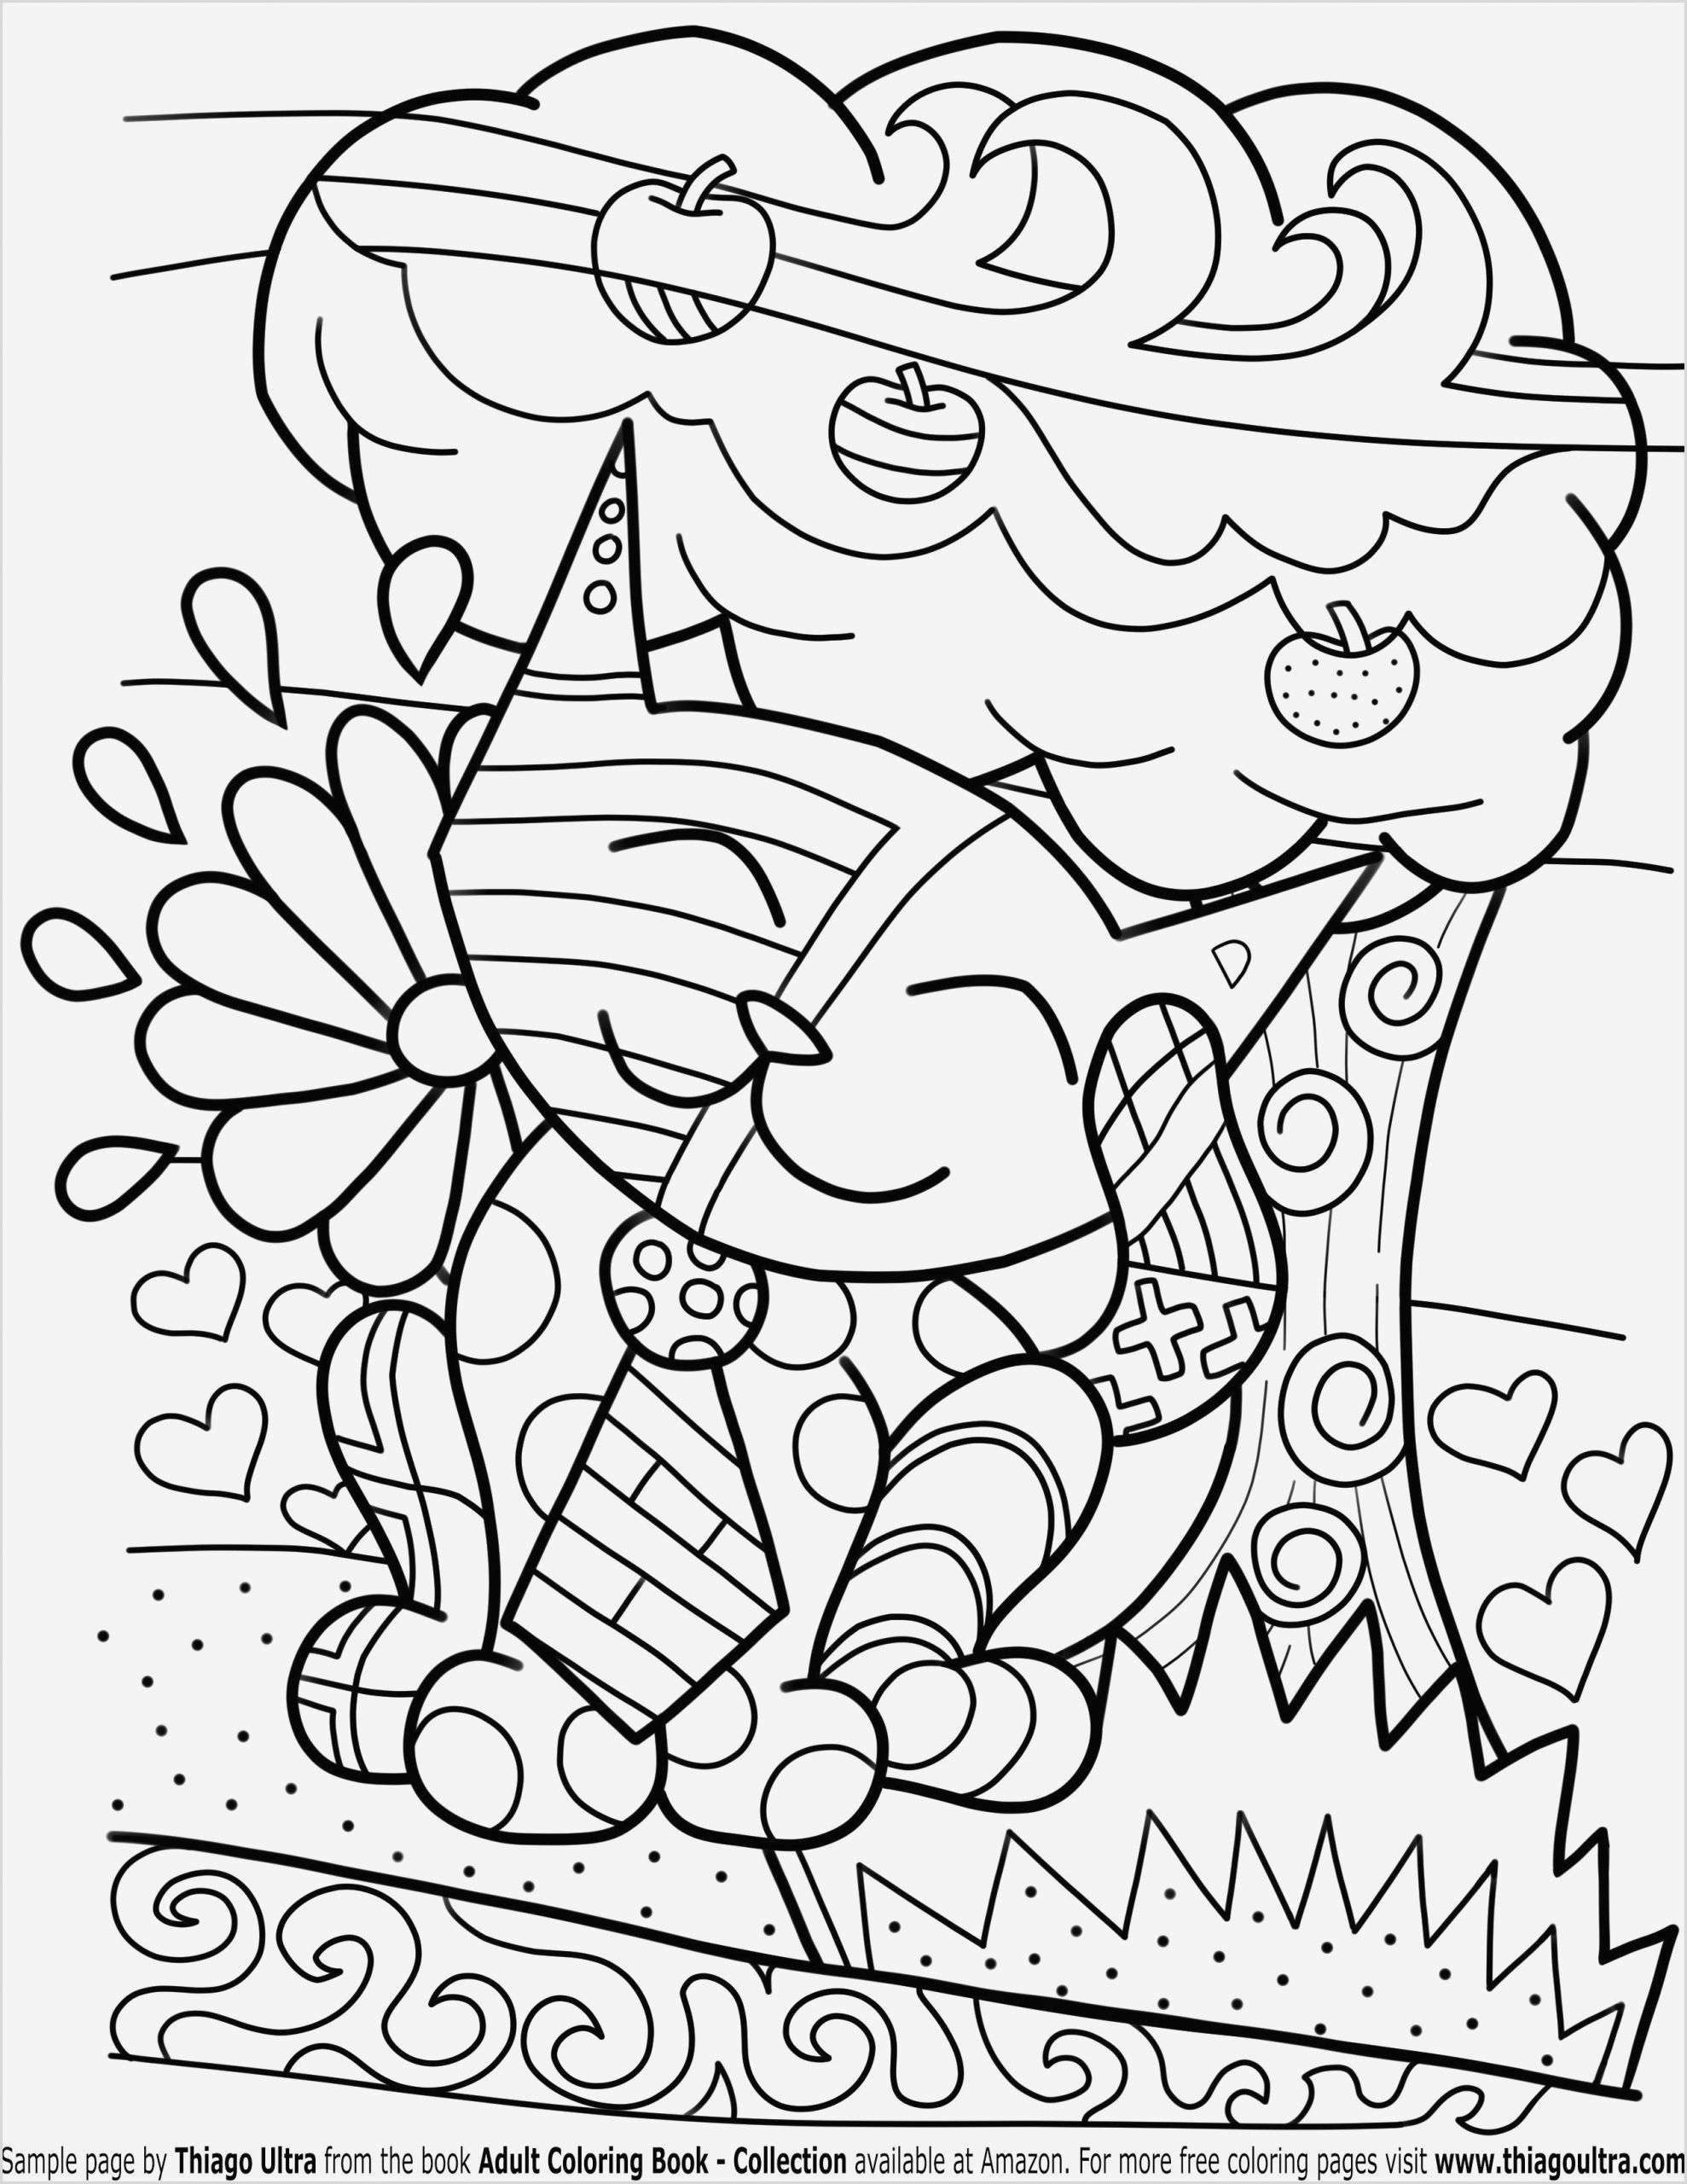 Coloring Books : Adult Coloring Pages Words English Mr Bean ...